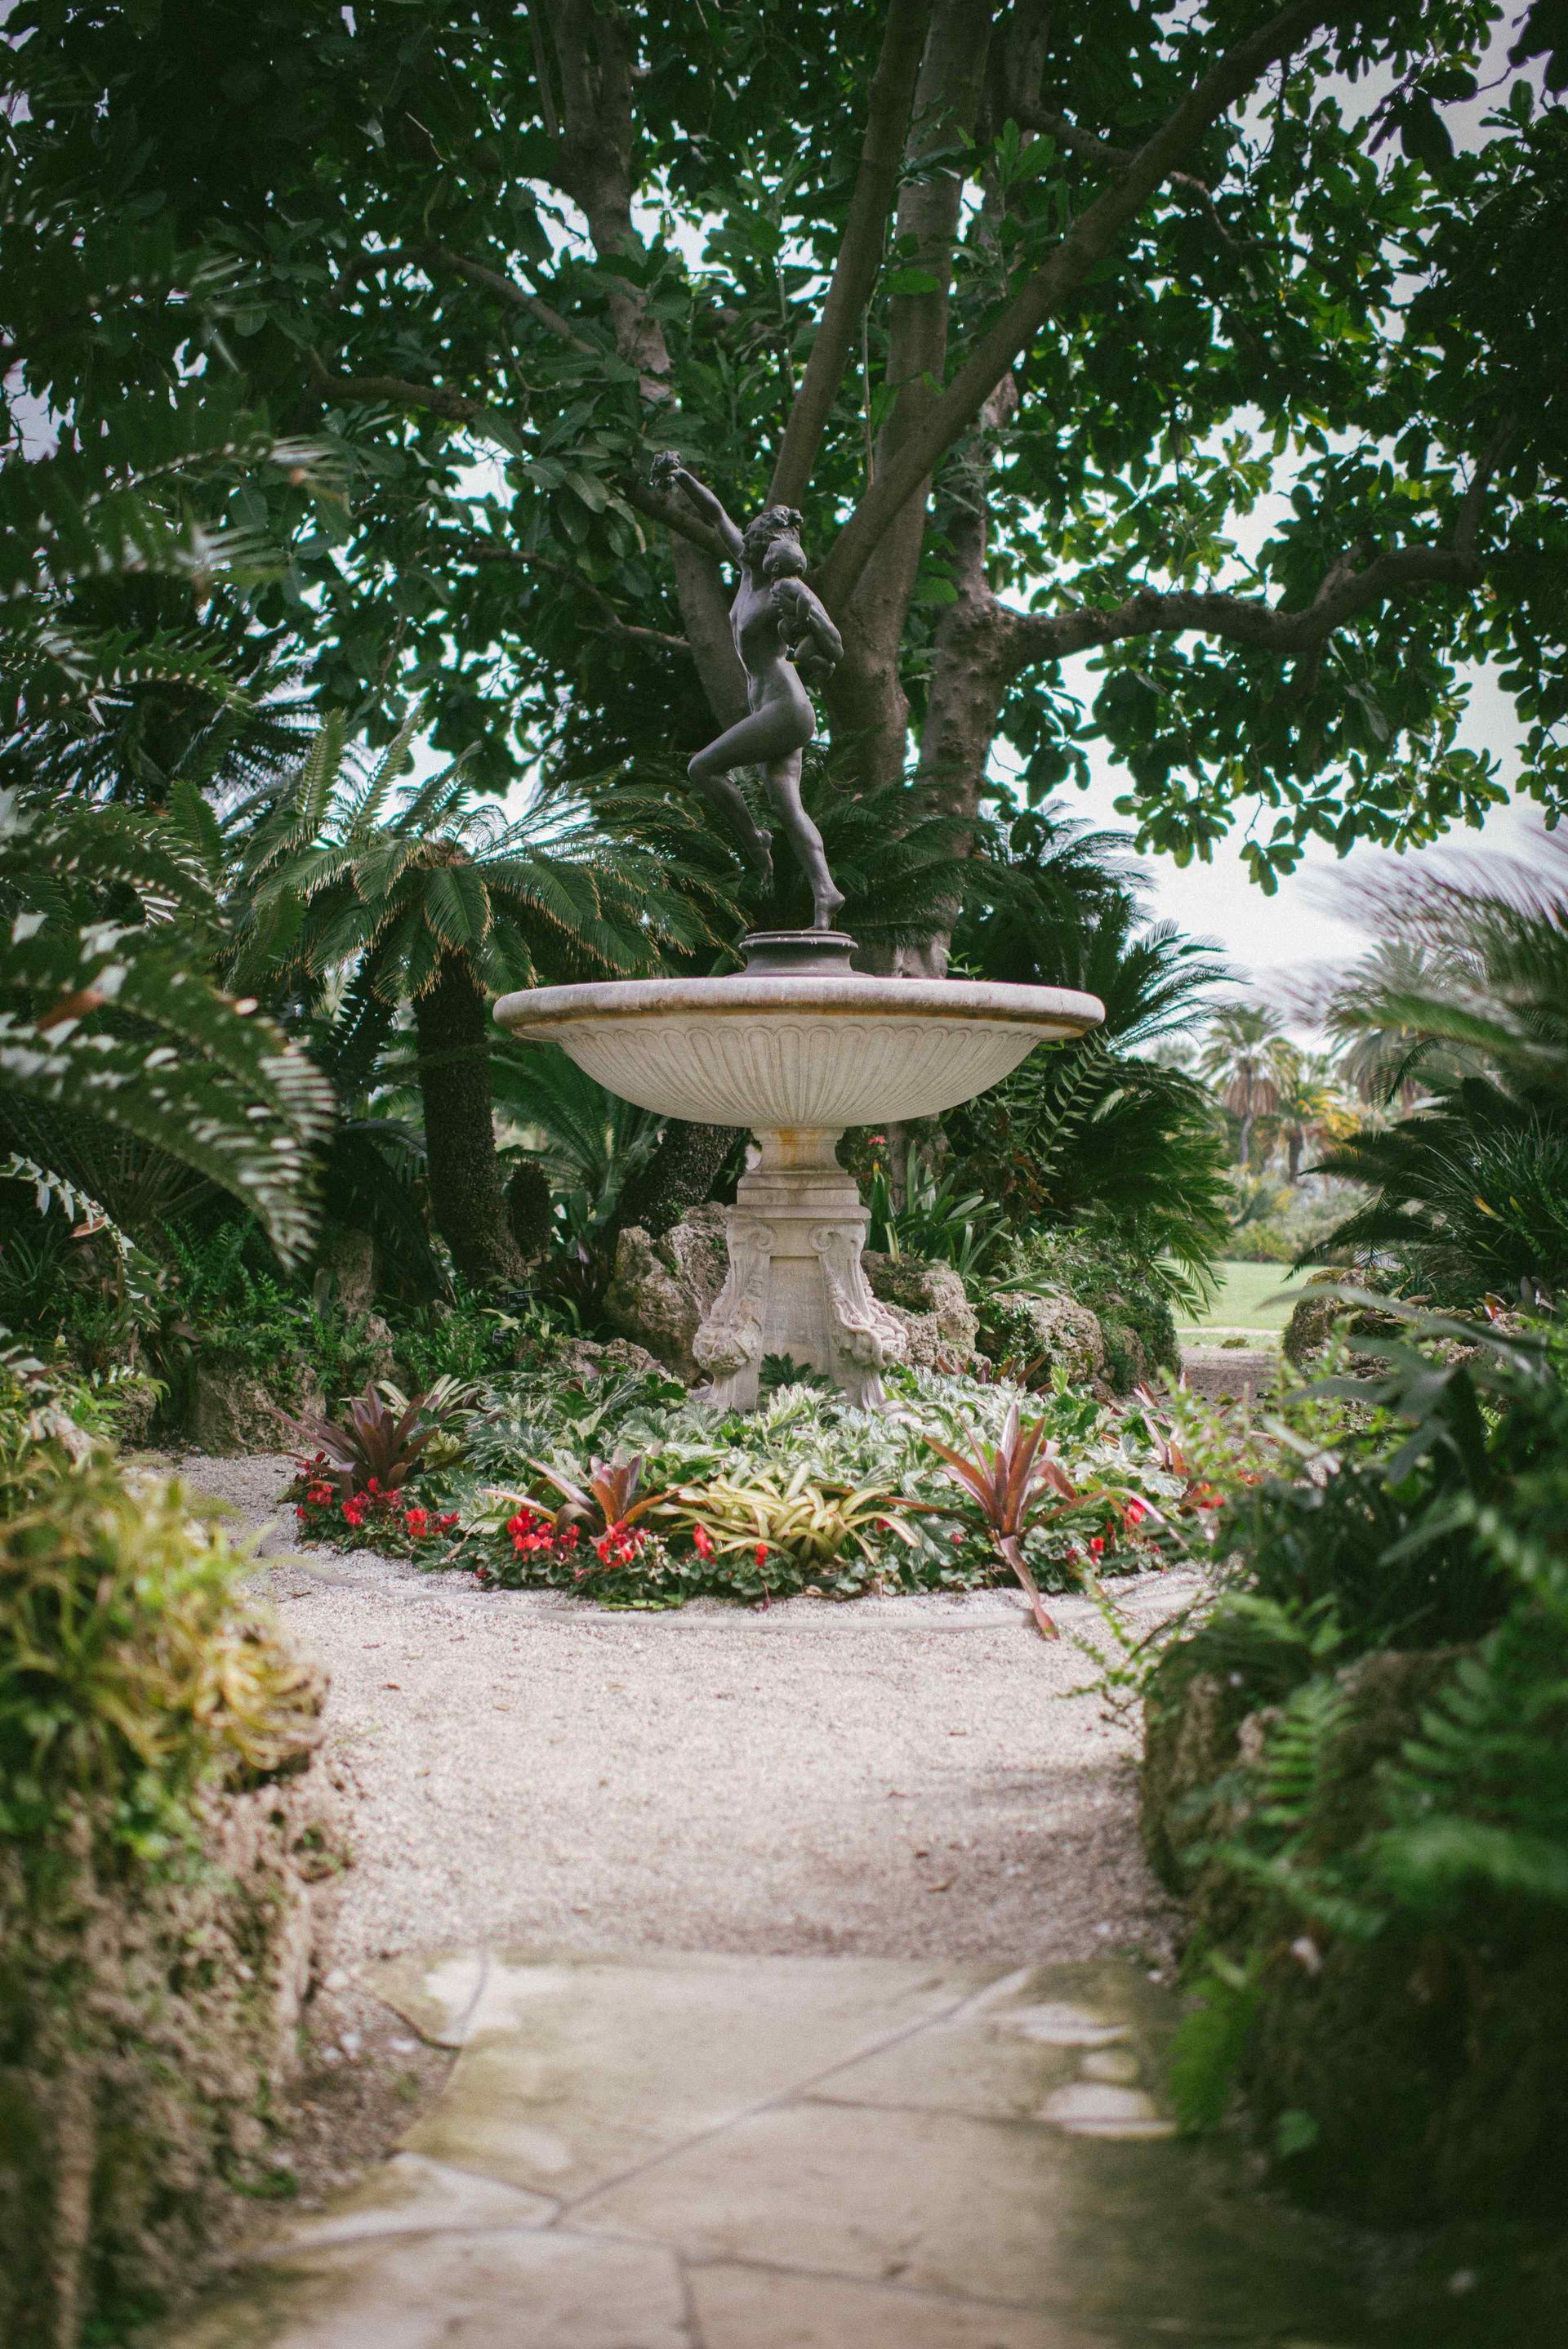 Large Affordable Water Fountain With Statue On Top Surrounded By Sub Tropical Plants